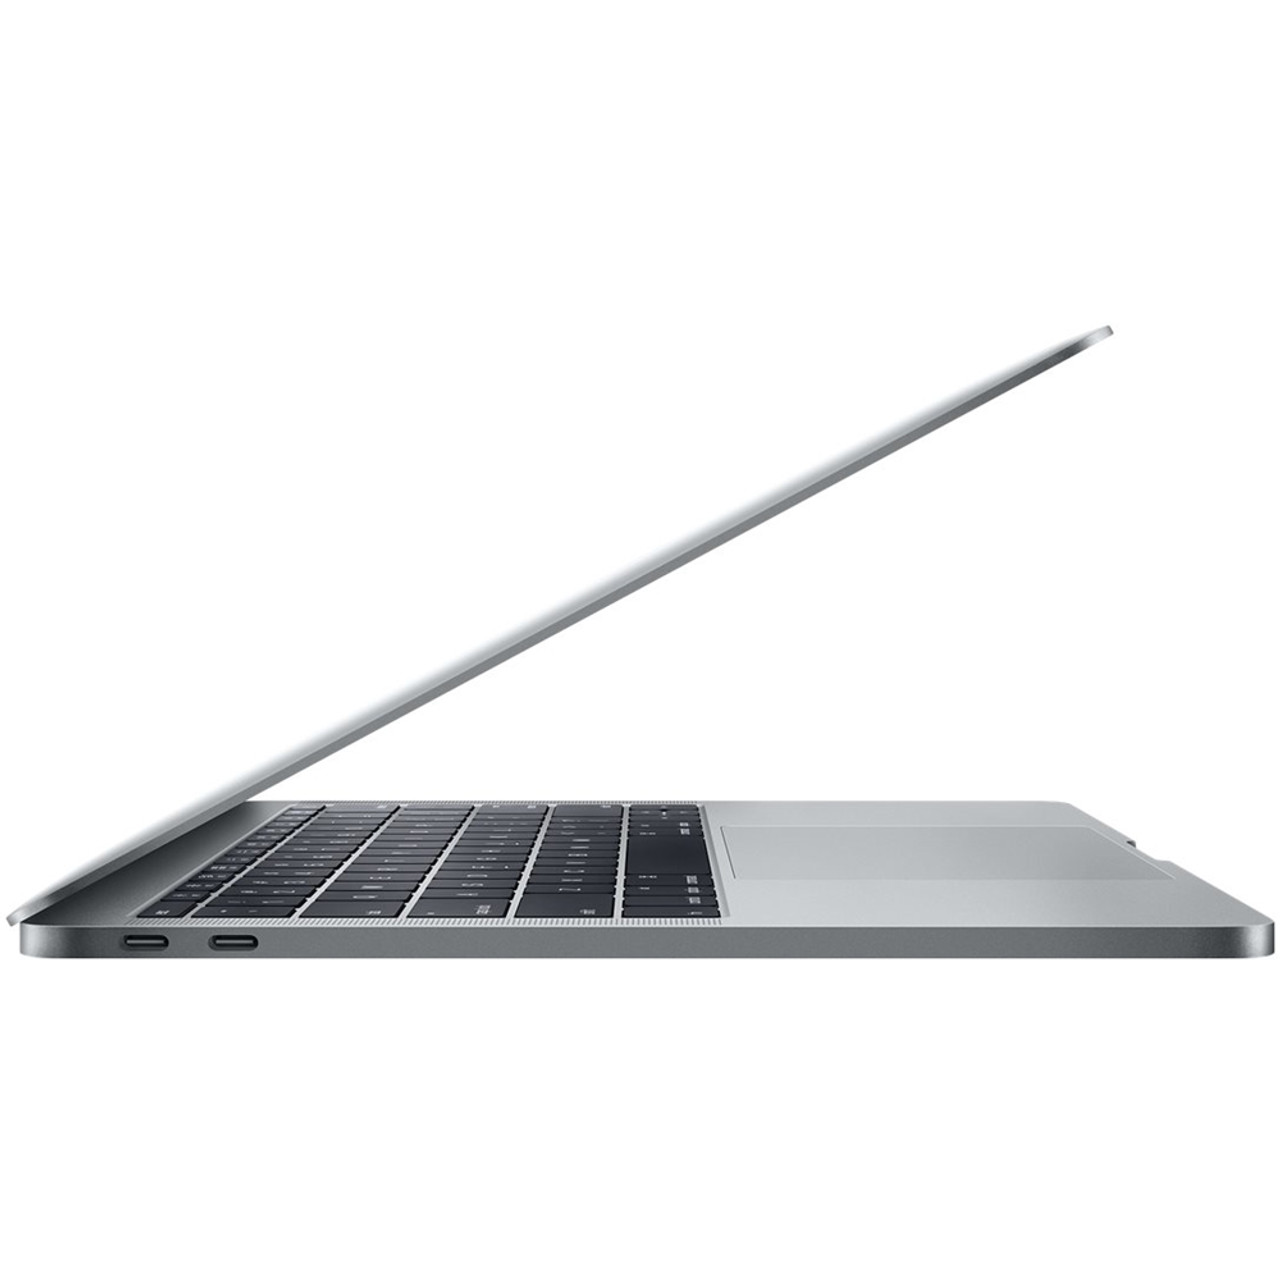 Apple - MacBook Pro 13.3" Refurbished Laptop - Intel Core i5 - 8GB Memory - 128GB Solid State Drive - Silver